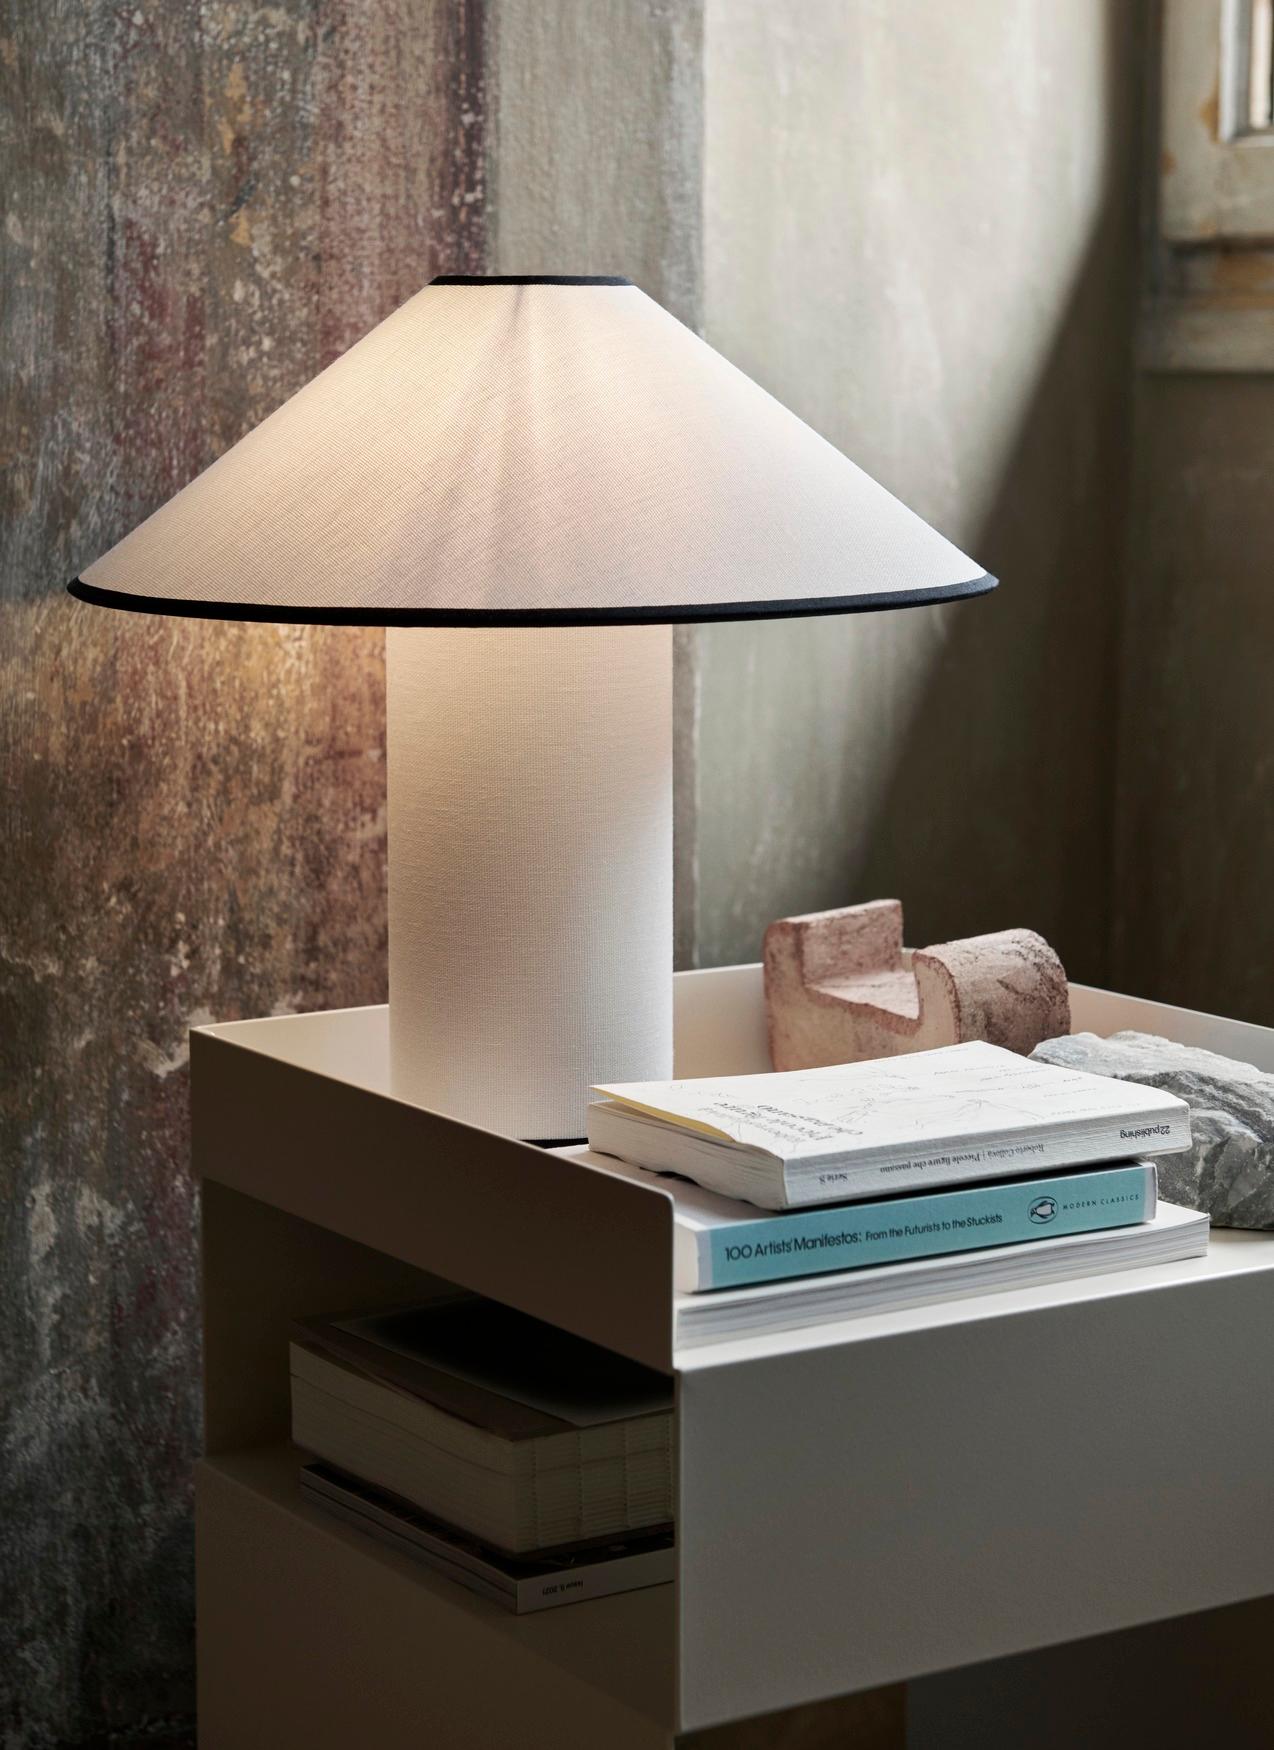 Named after the famed and pioneering French author known simply as ‘Colette’, &Tradition’s new table lamp has an avant-garde aesthetic. Showcasing a tactile shade and base fully encased in a crisp, off-white cotton-linen blend, this dimmable lamp is